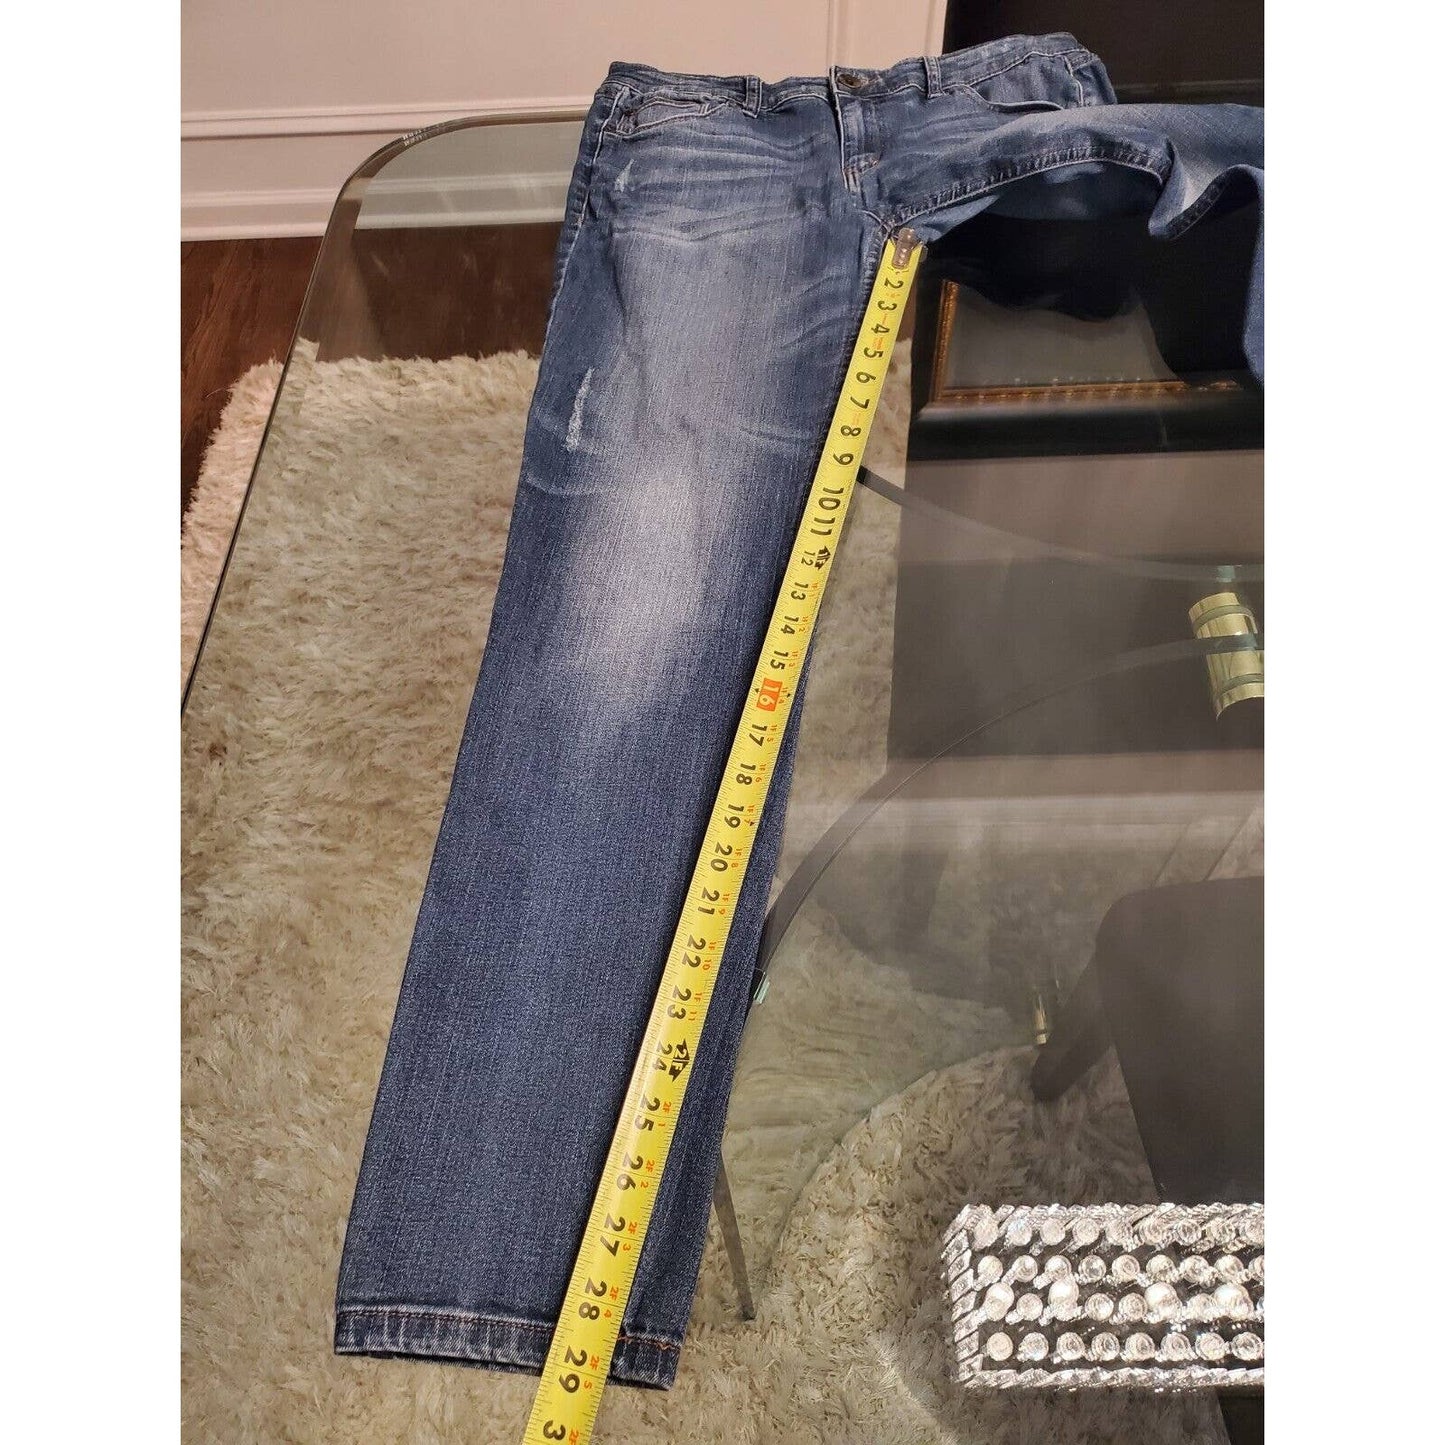 A New Approach Women's Blue Denim Cotton Mid Rise Skinny Fit Jeans Pant